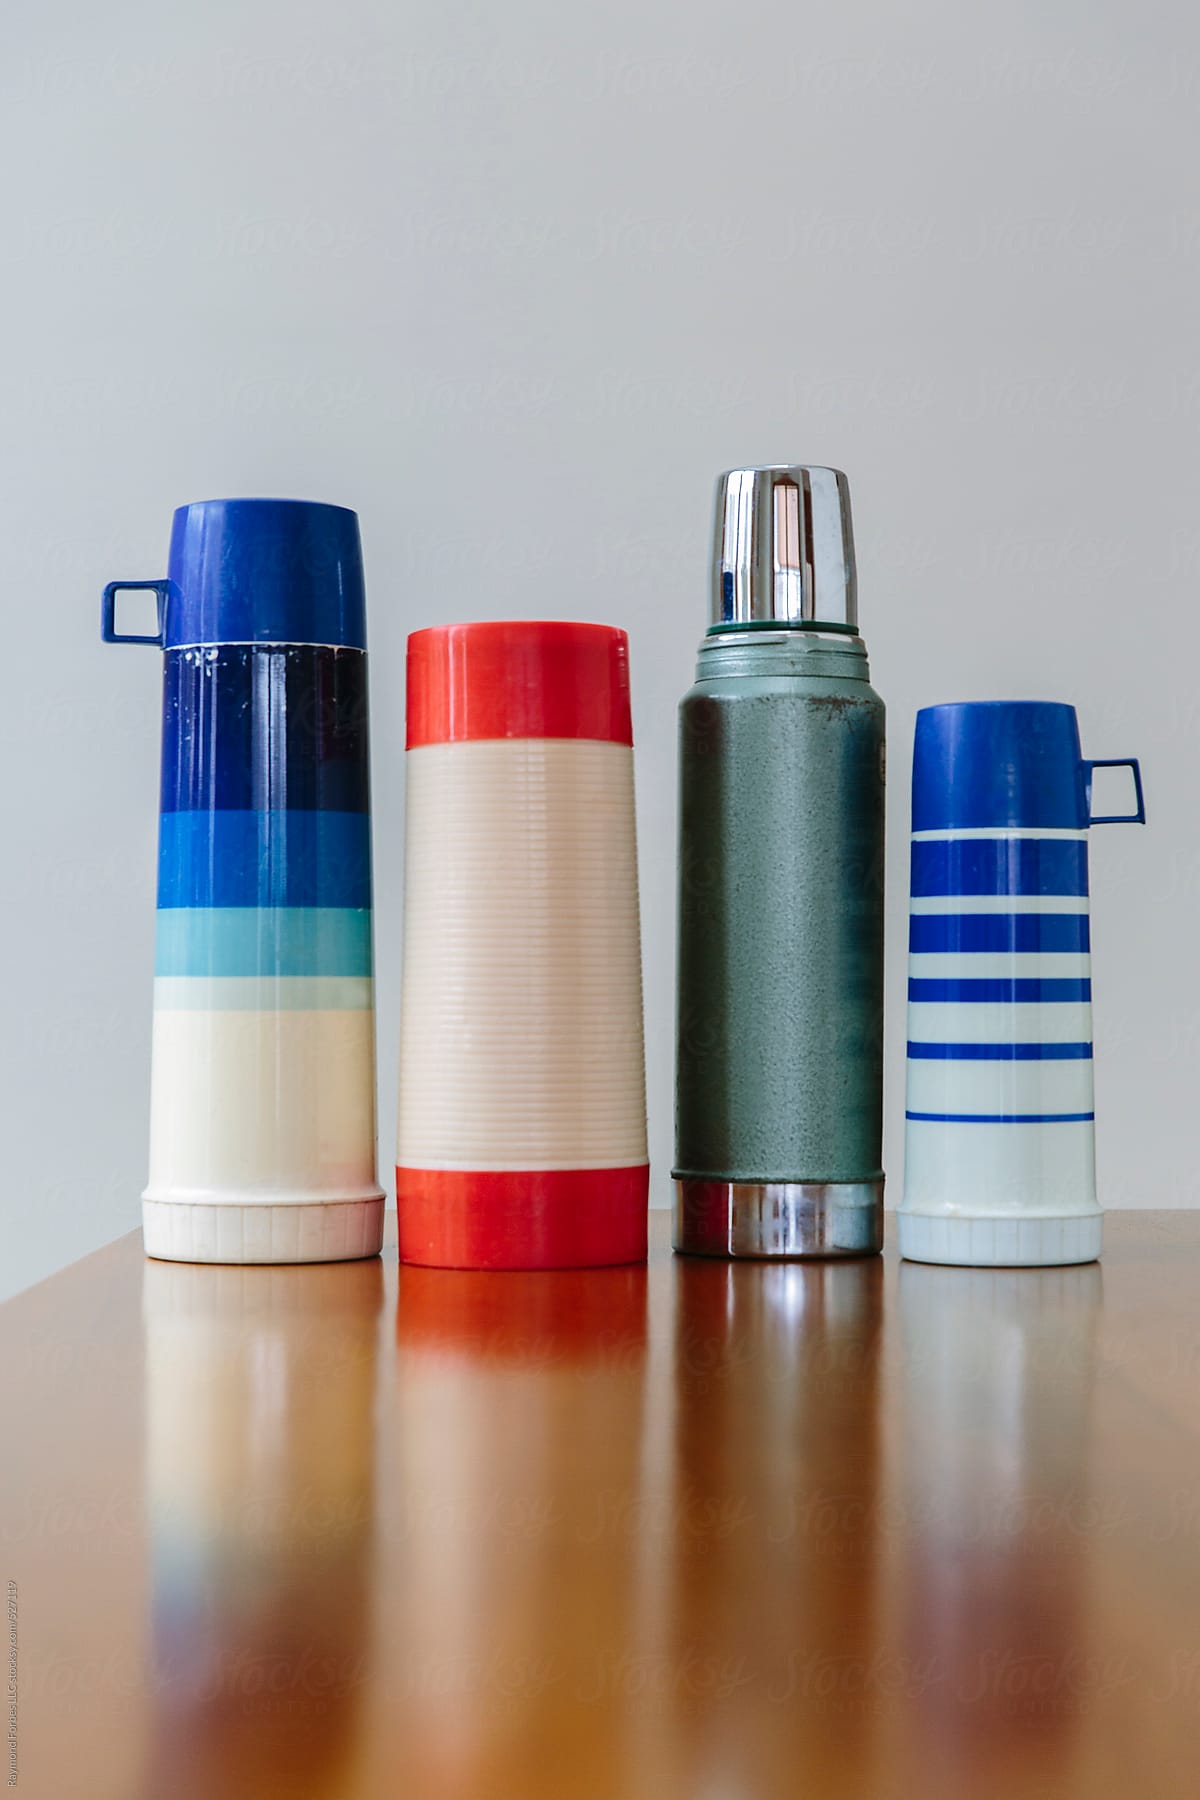 Vintage Thermos Collection by Stocksy Contributor Raymond Forbes LLC -  Stocksy